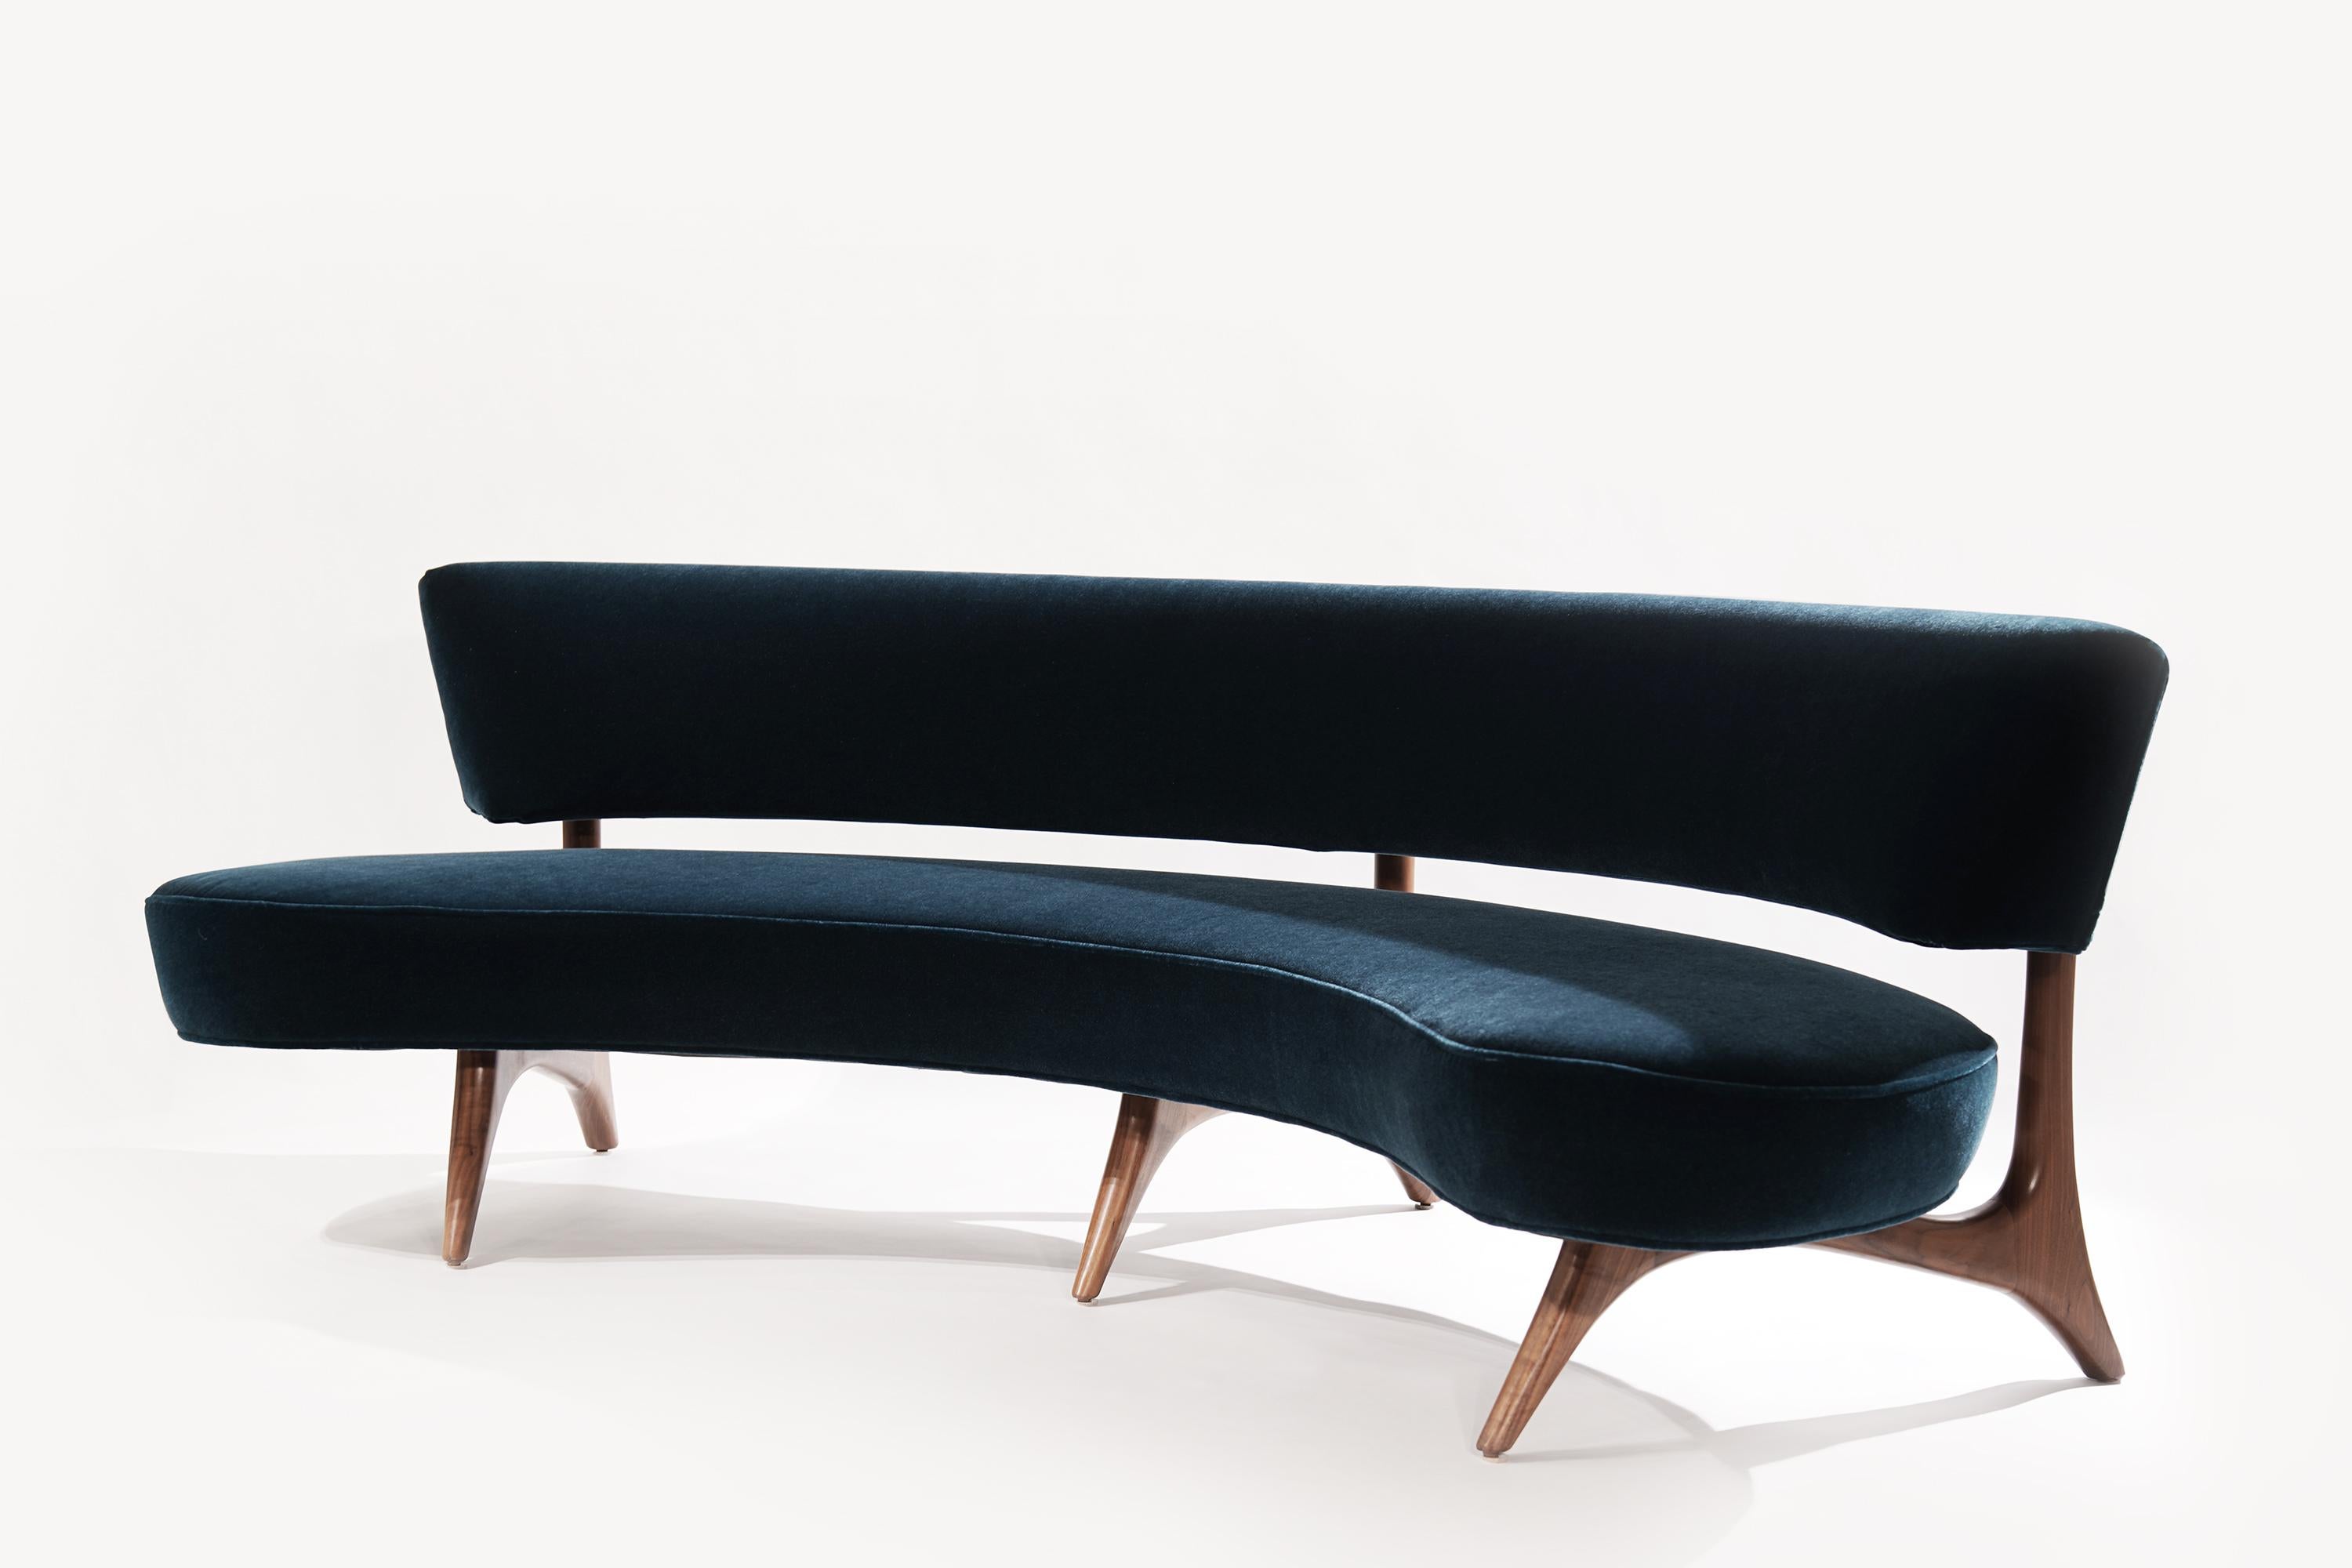 First designed in 1952, the Floating Curved Sofa united two early Kagan signatures with its curved shape and elegantly sculpted walnut frame. The floating backrest invites placement away from the walls, with negative spaces that allow glimpses of